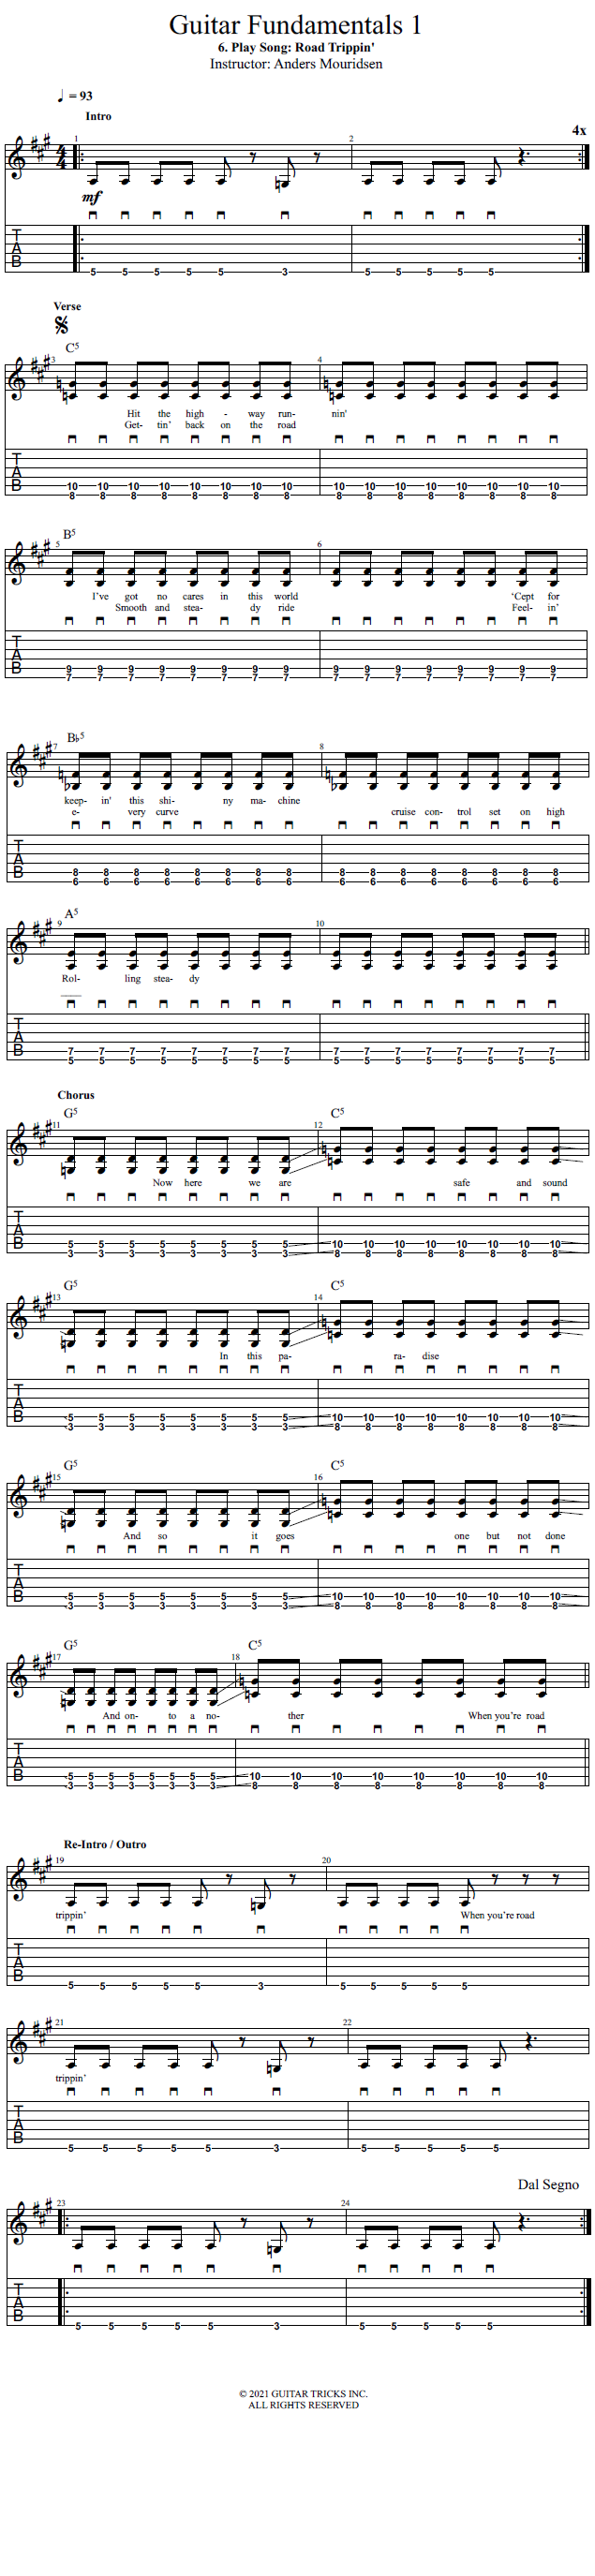 Play Song: Road Trippin' song notation